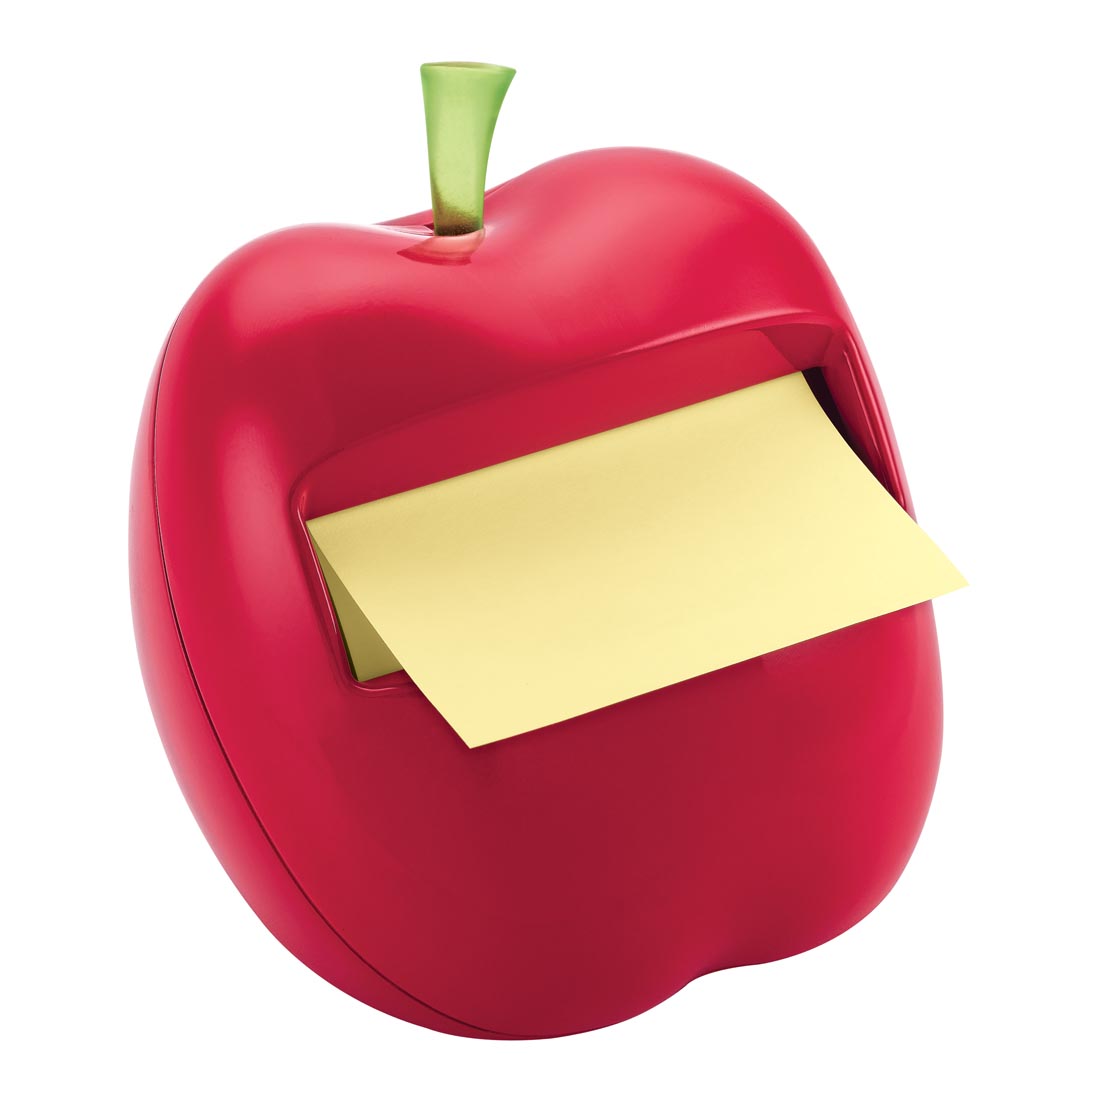 Post-it Apple Notes Dispenser with post-it notes